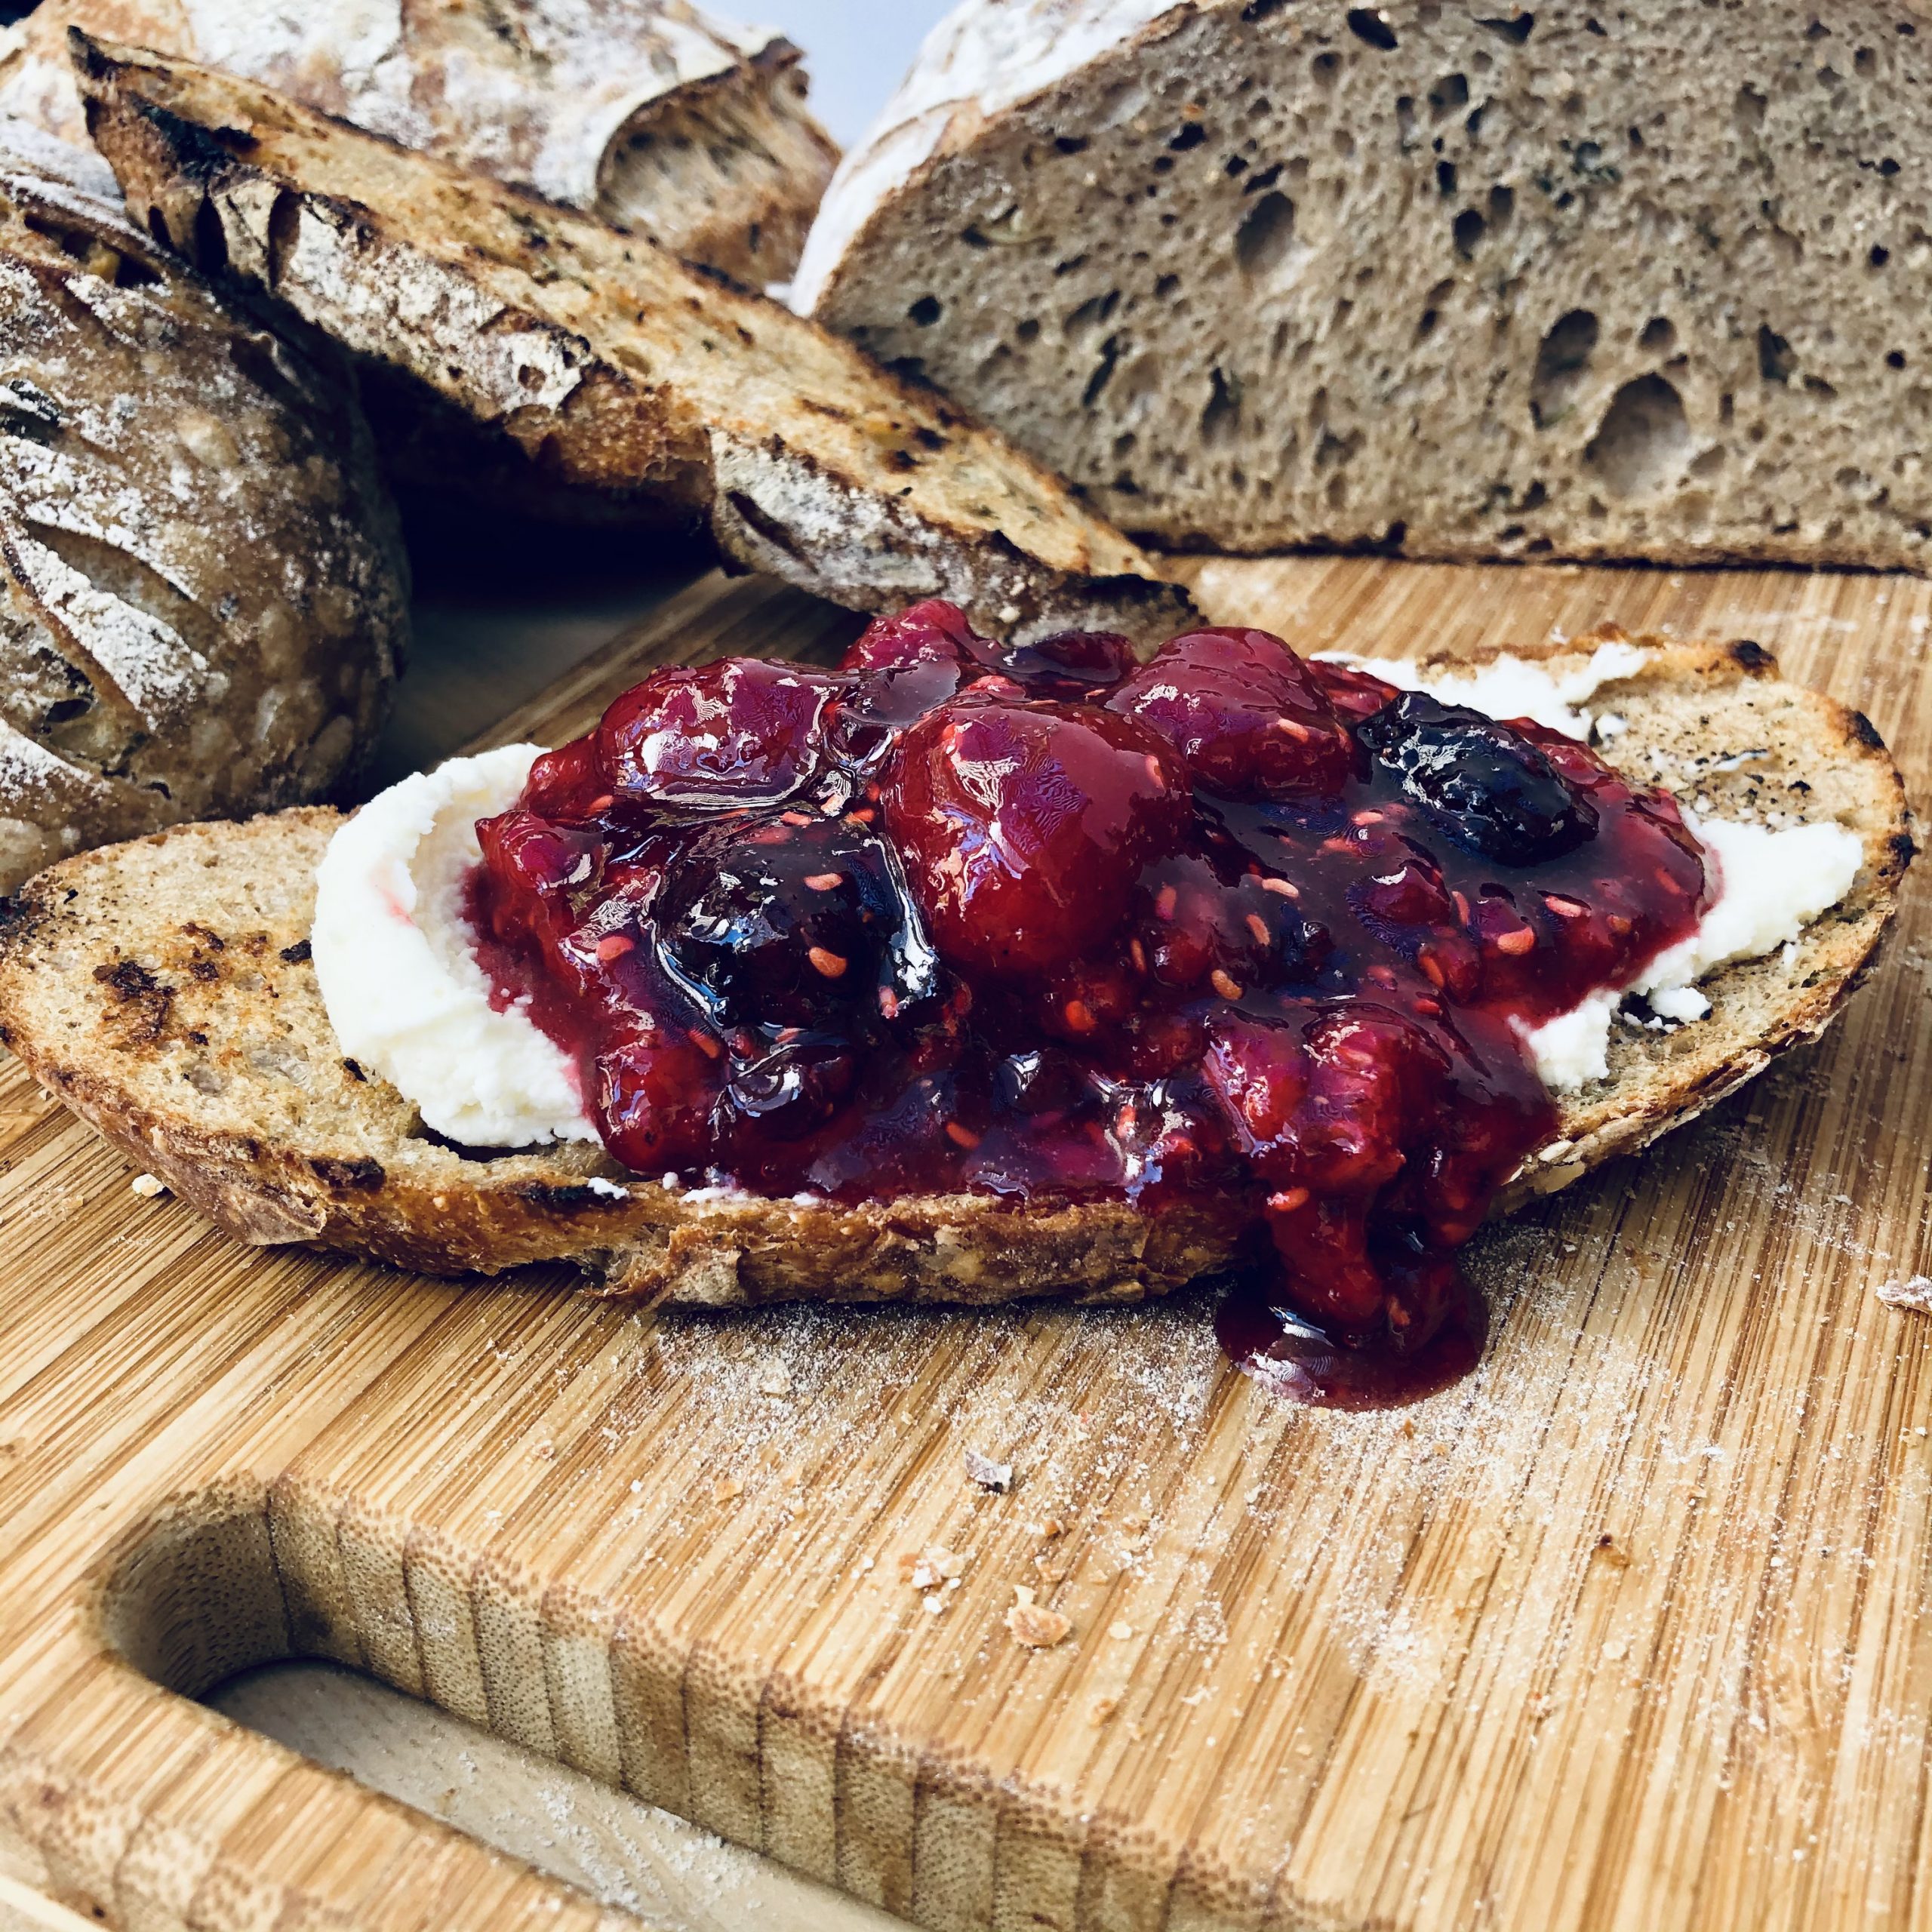 Mascapone cheese with berry preserves on roasted garlic and herbs sourdough